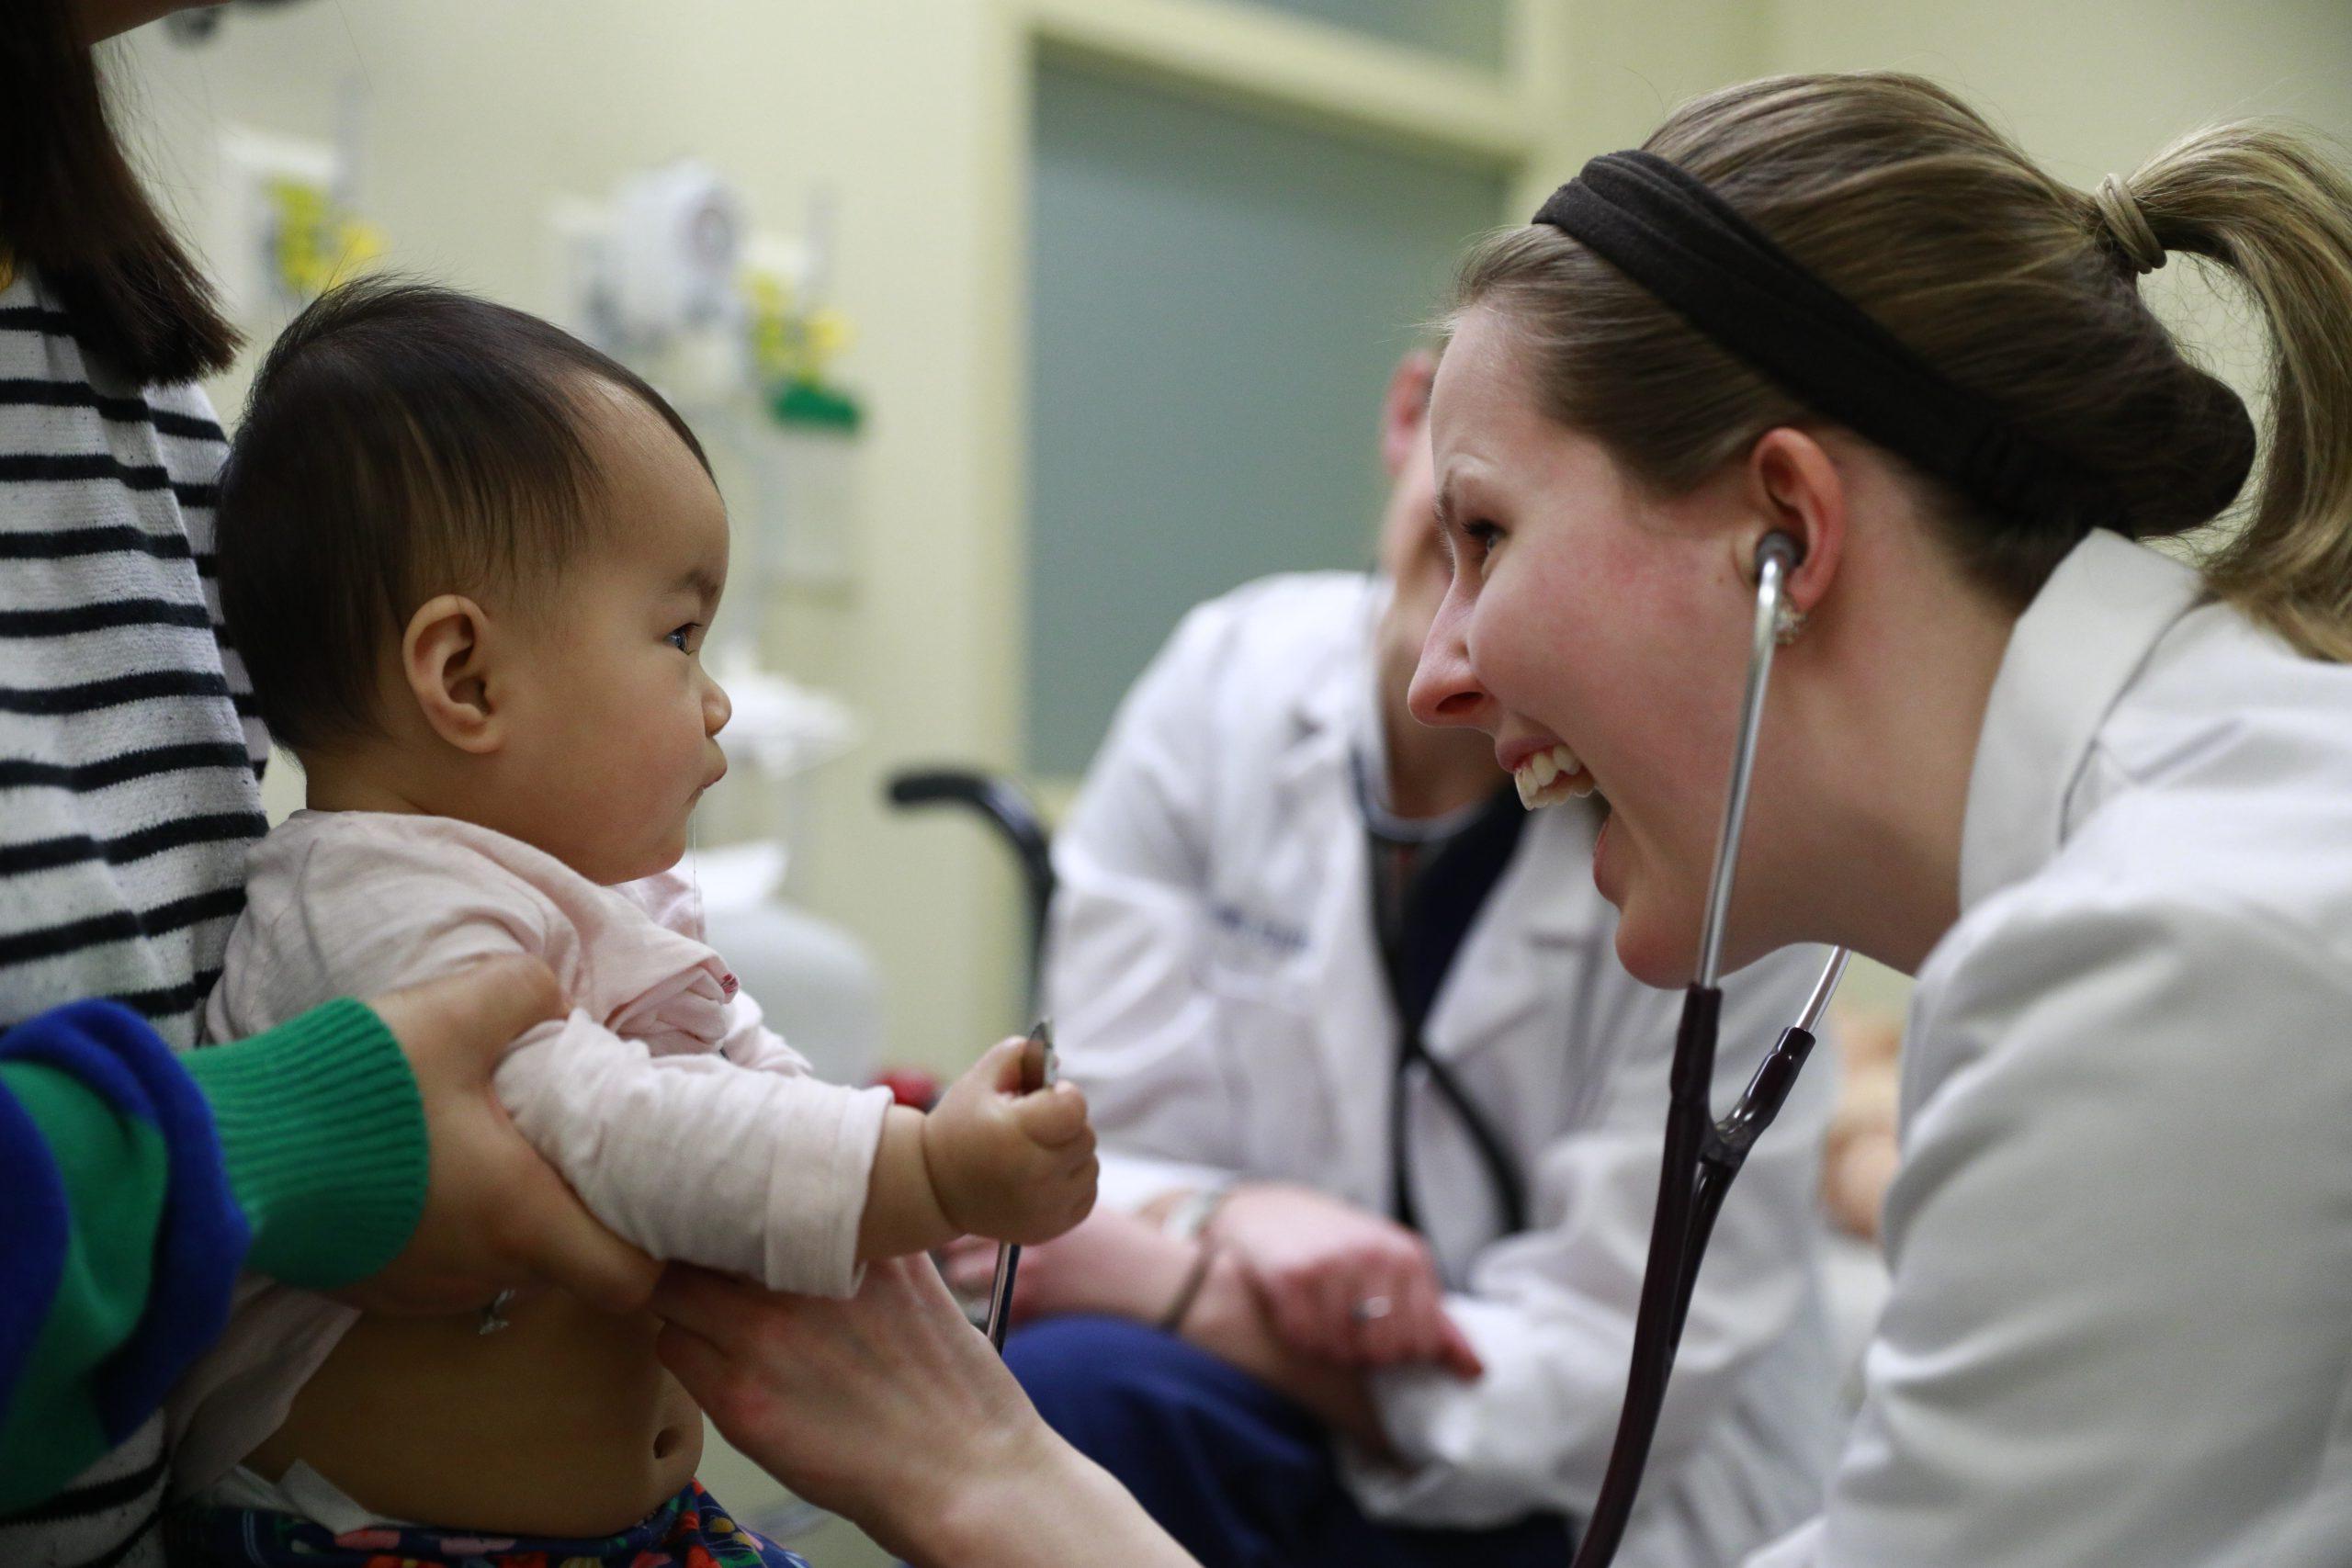 A pediatric student using a stethoscope on a young baby